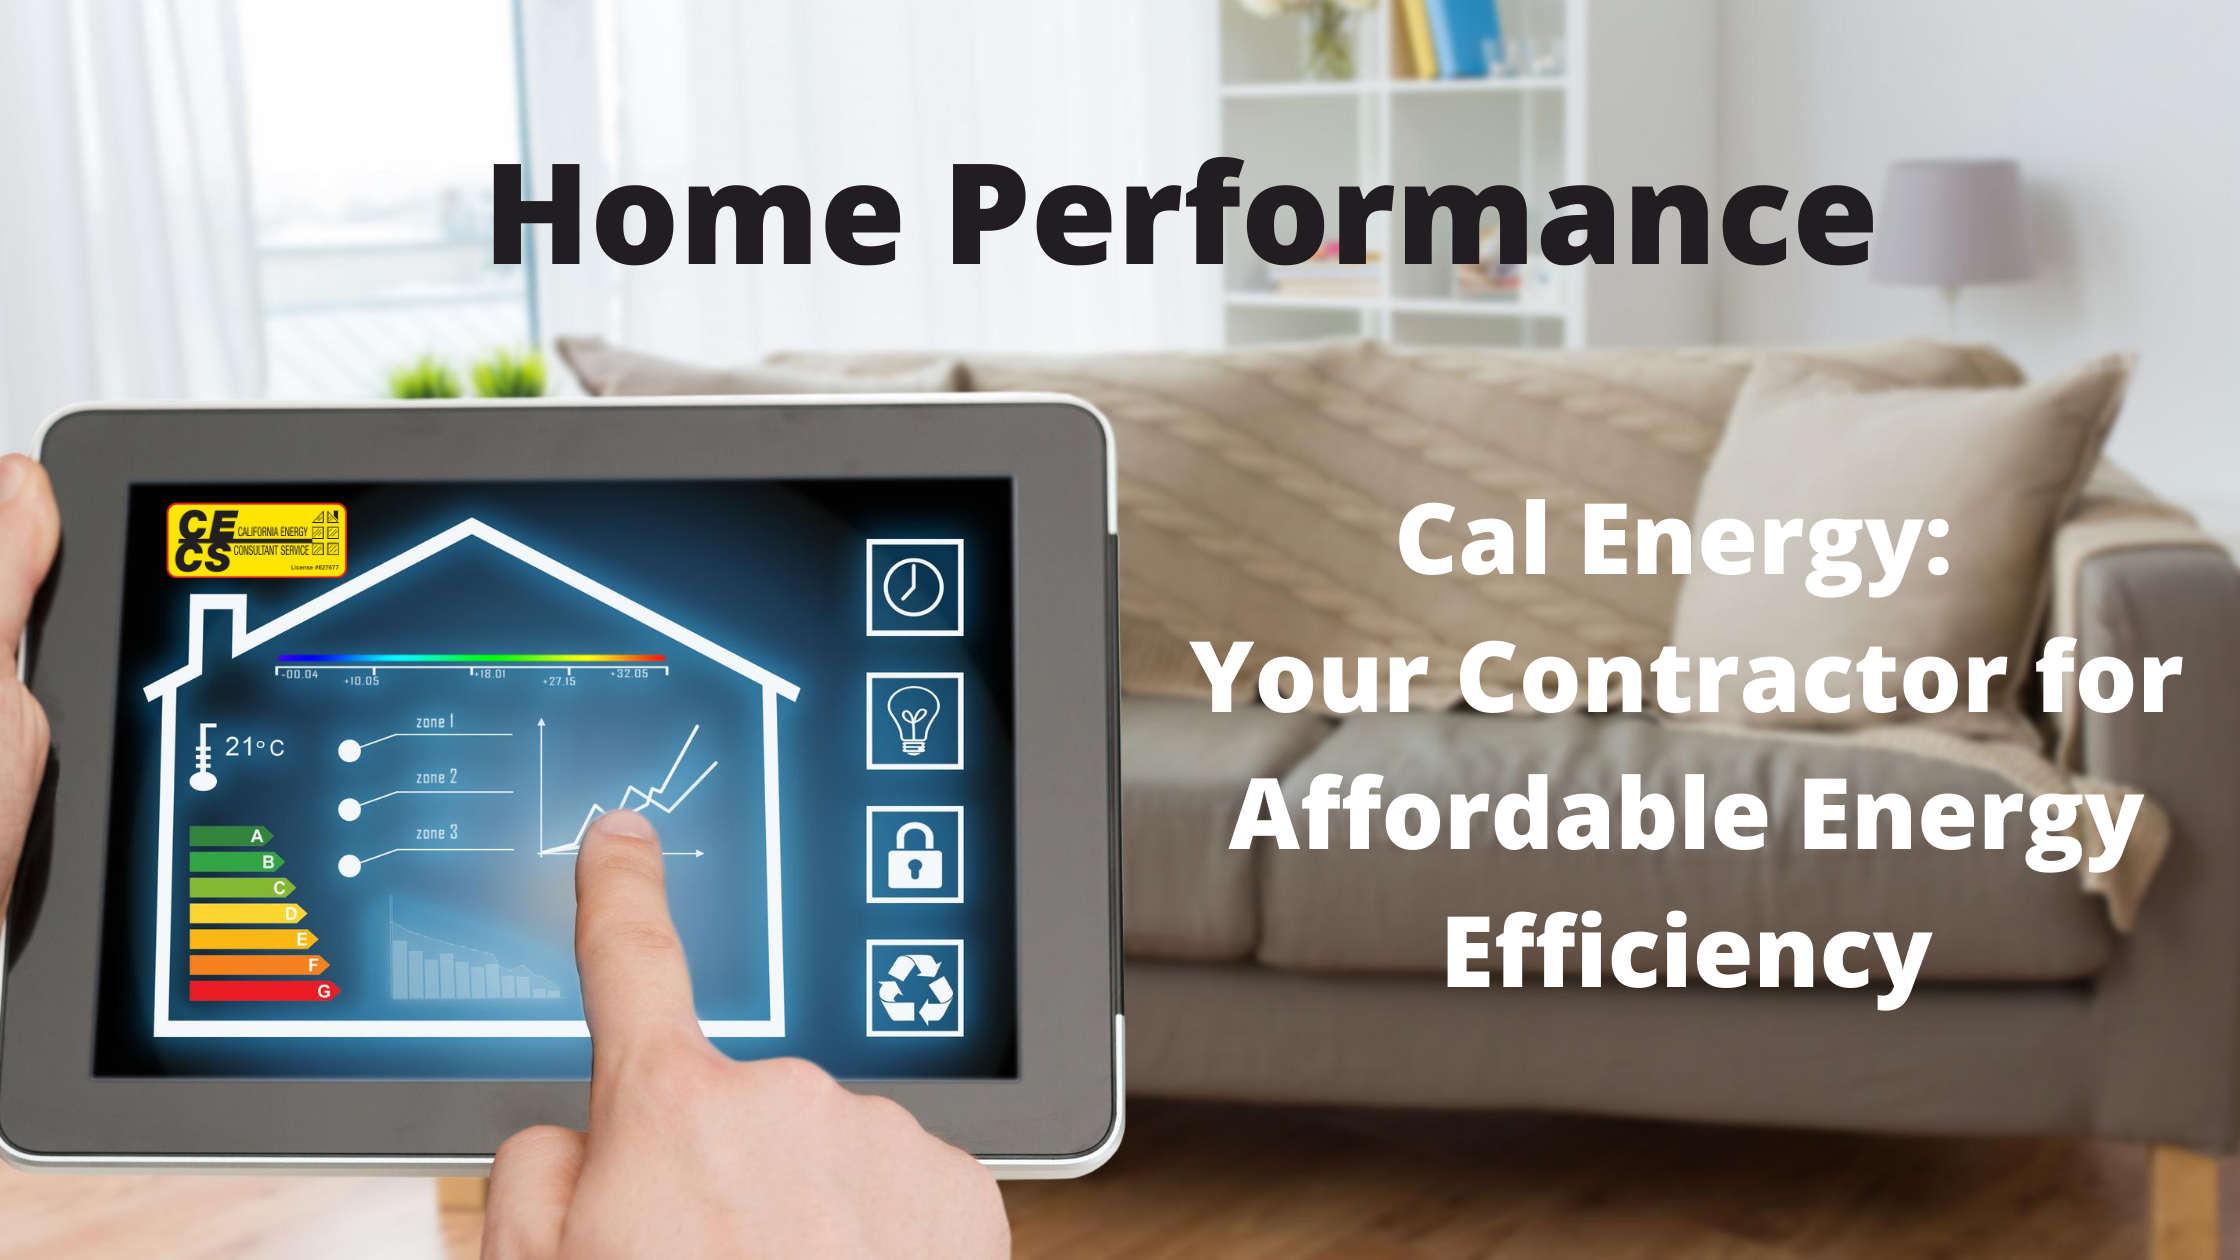 home performance energy efficiency Cal Energy Contractor